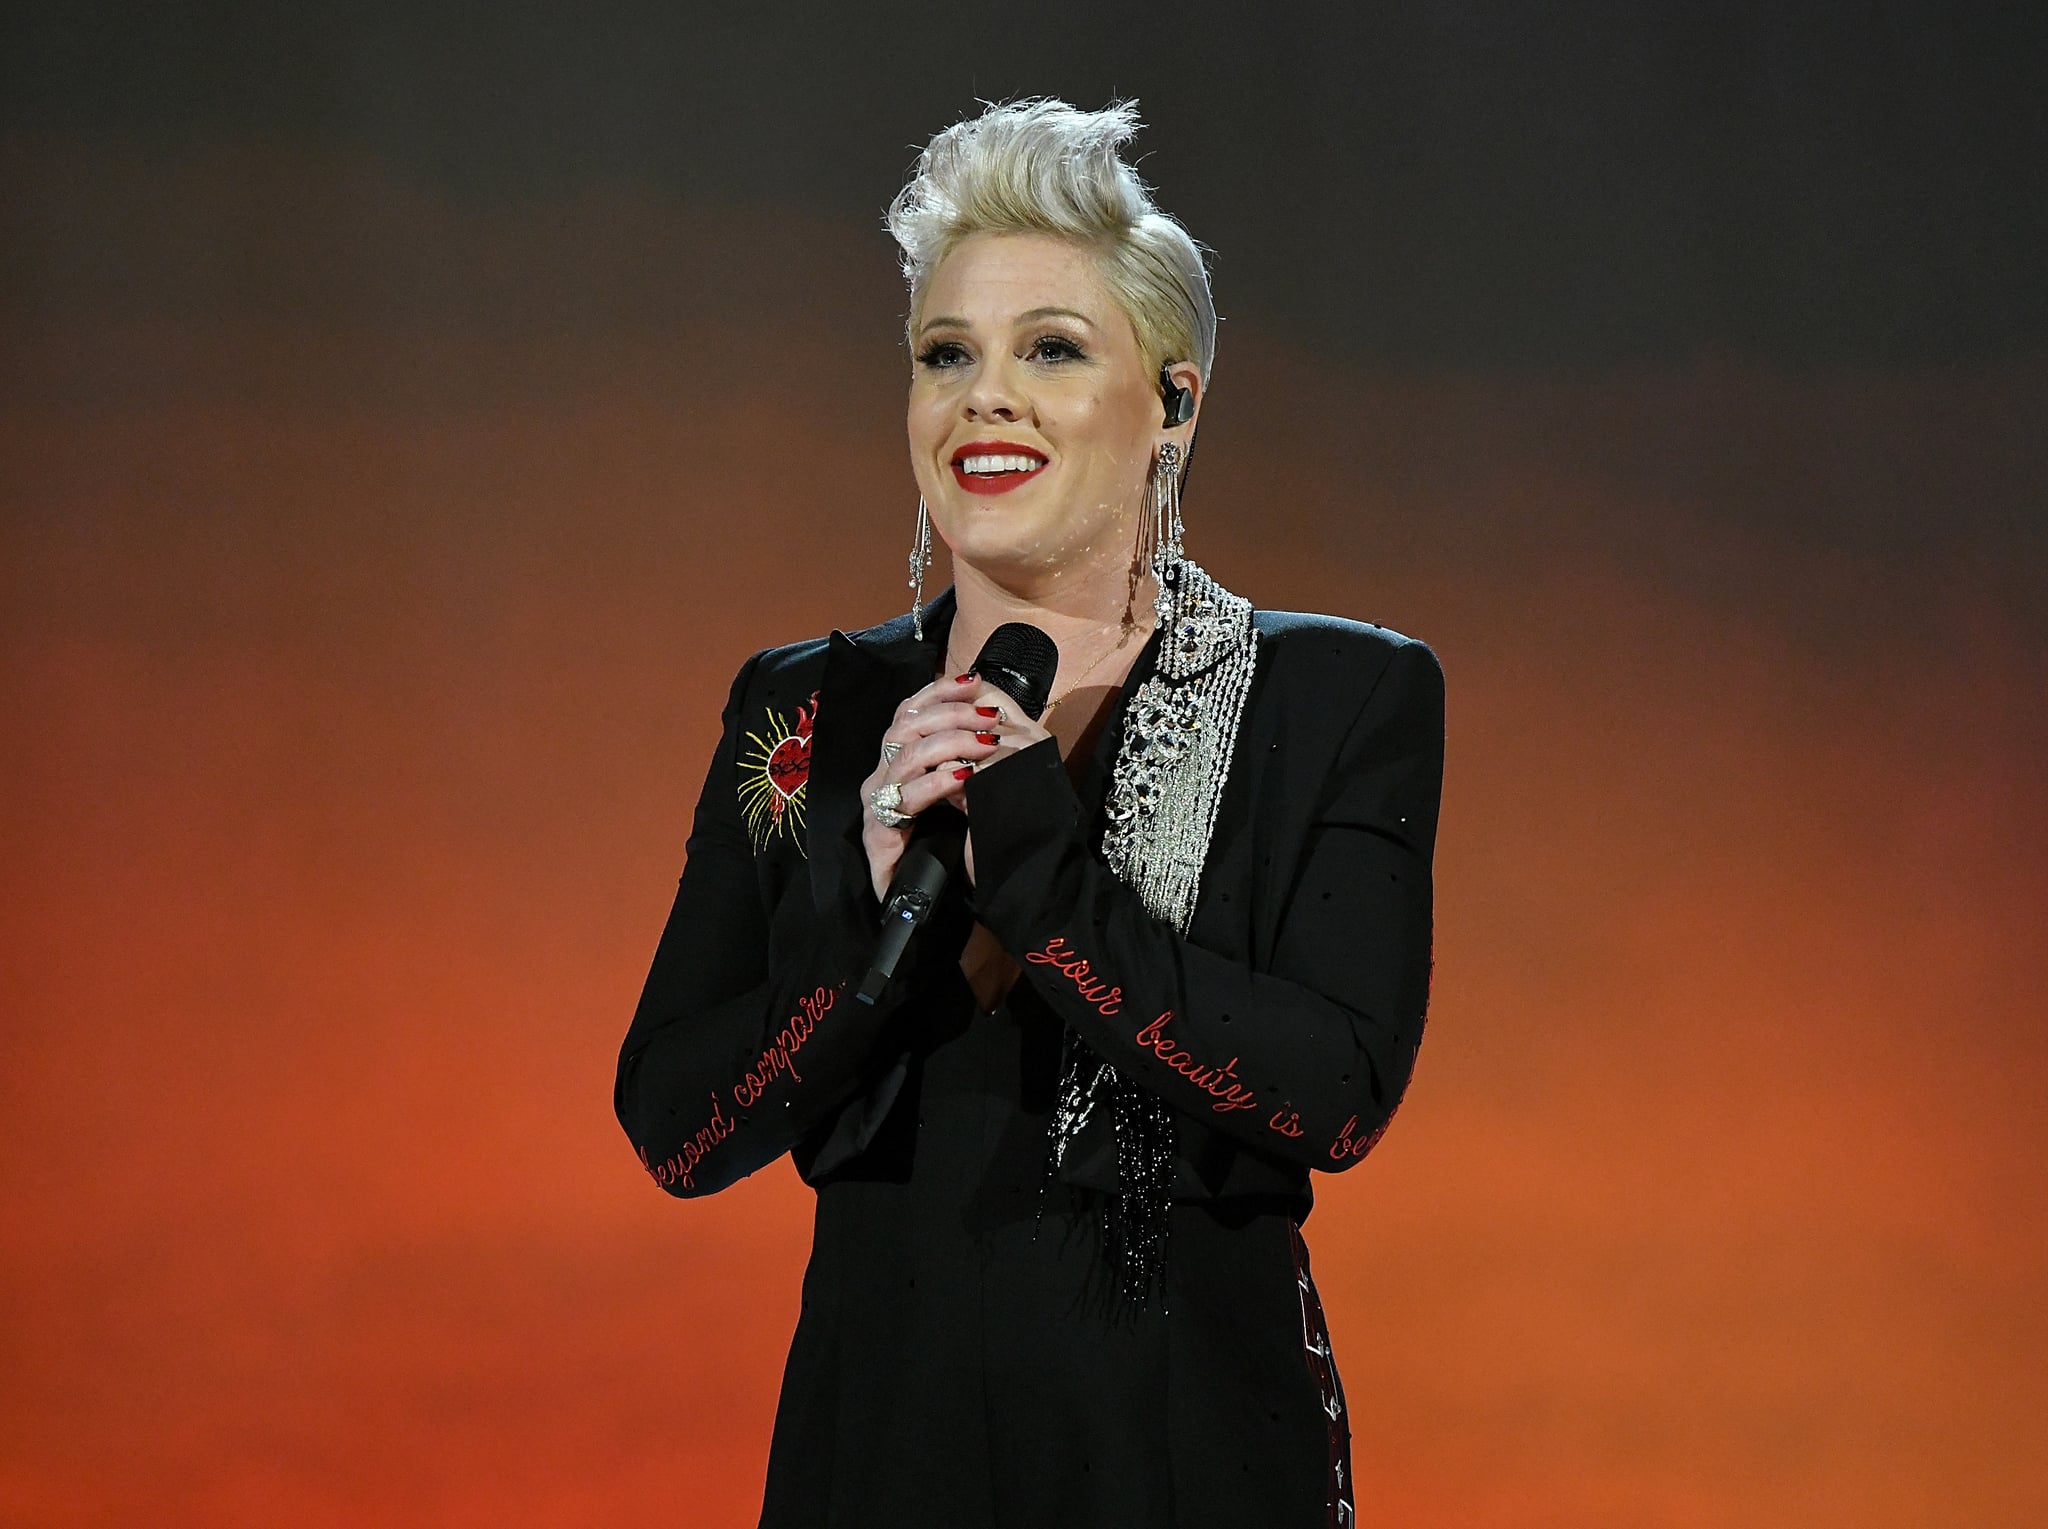 LOS ANGELES, CA - FEBRUARY 08:  P!nk performs onstage at MusiCares Person of the Year honoring Dolly Parton at Los Angeles Convention Center on February 8, 2019 in Los Angeles, California.  (Photo by Michael Kovac/Getty Images for NARAS)